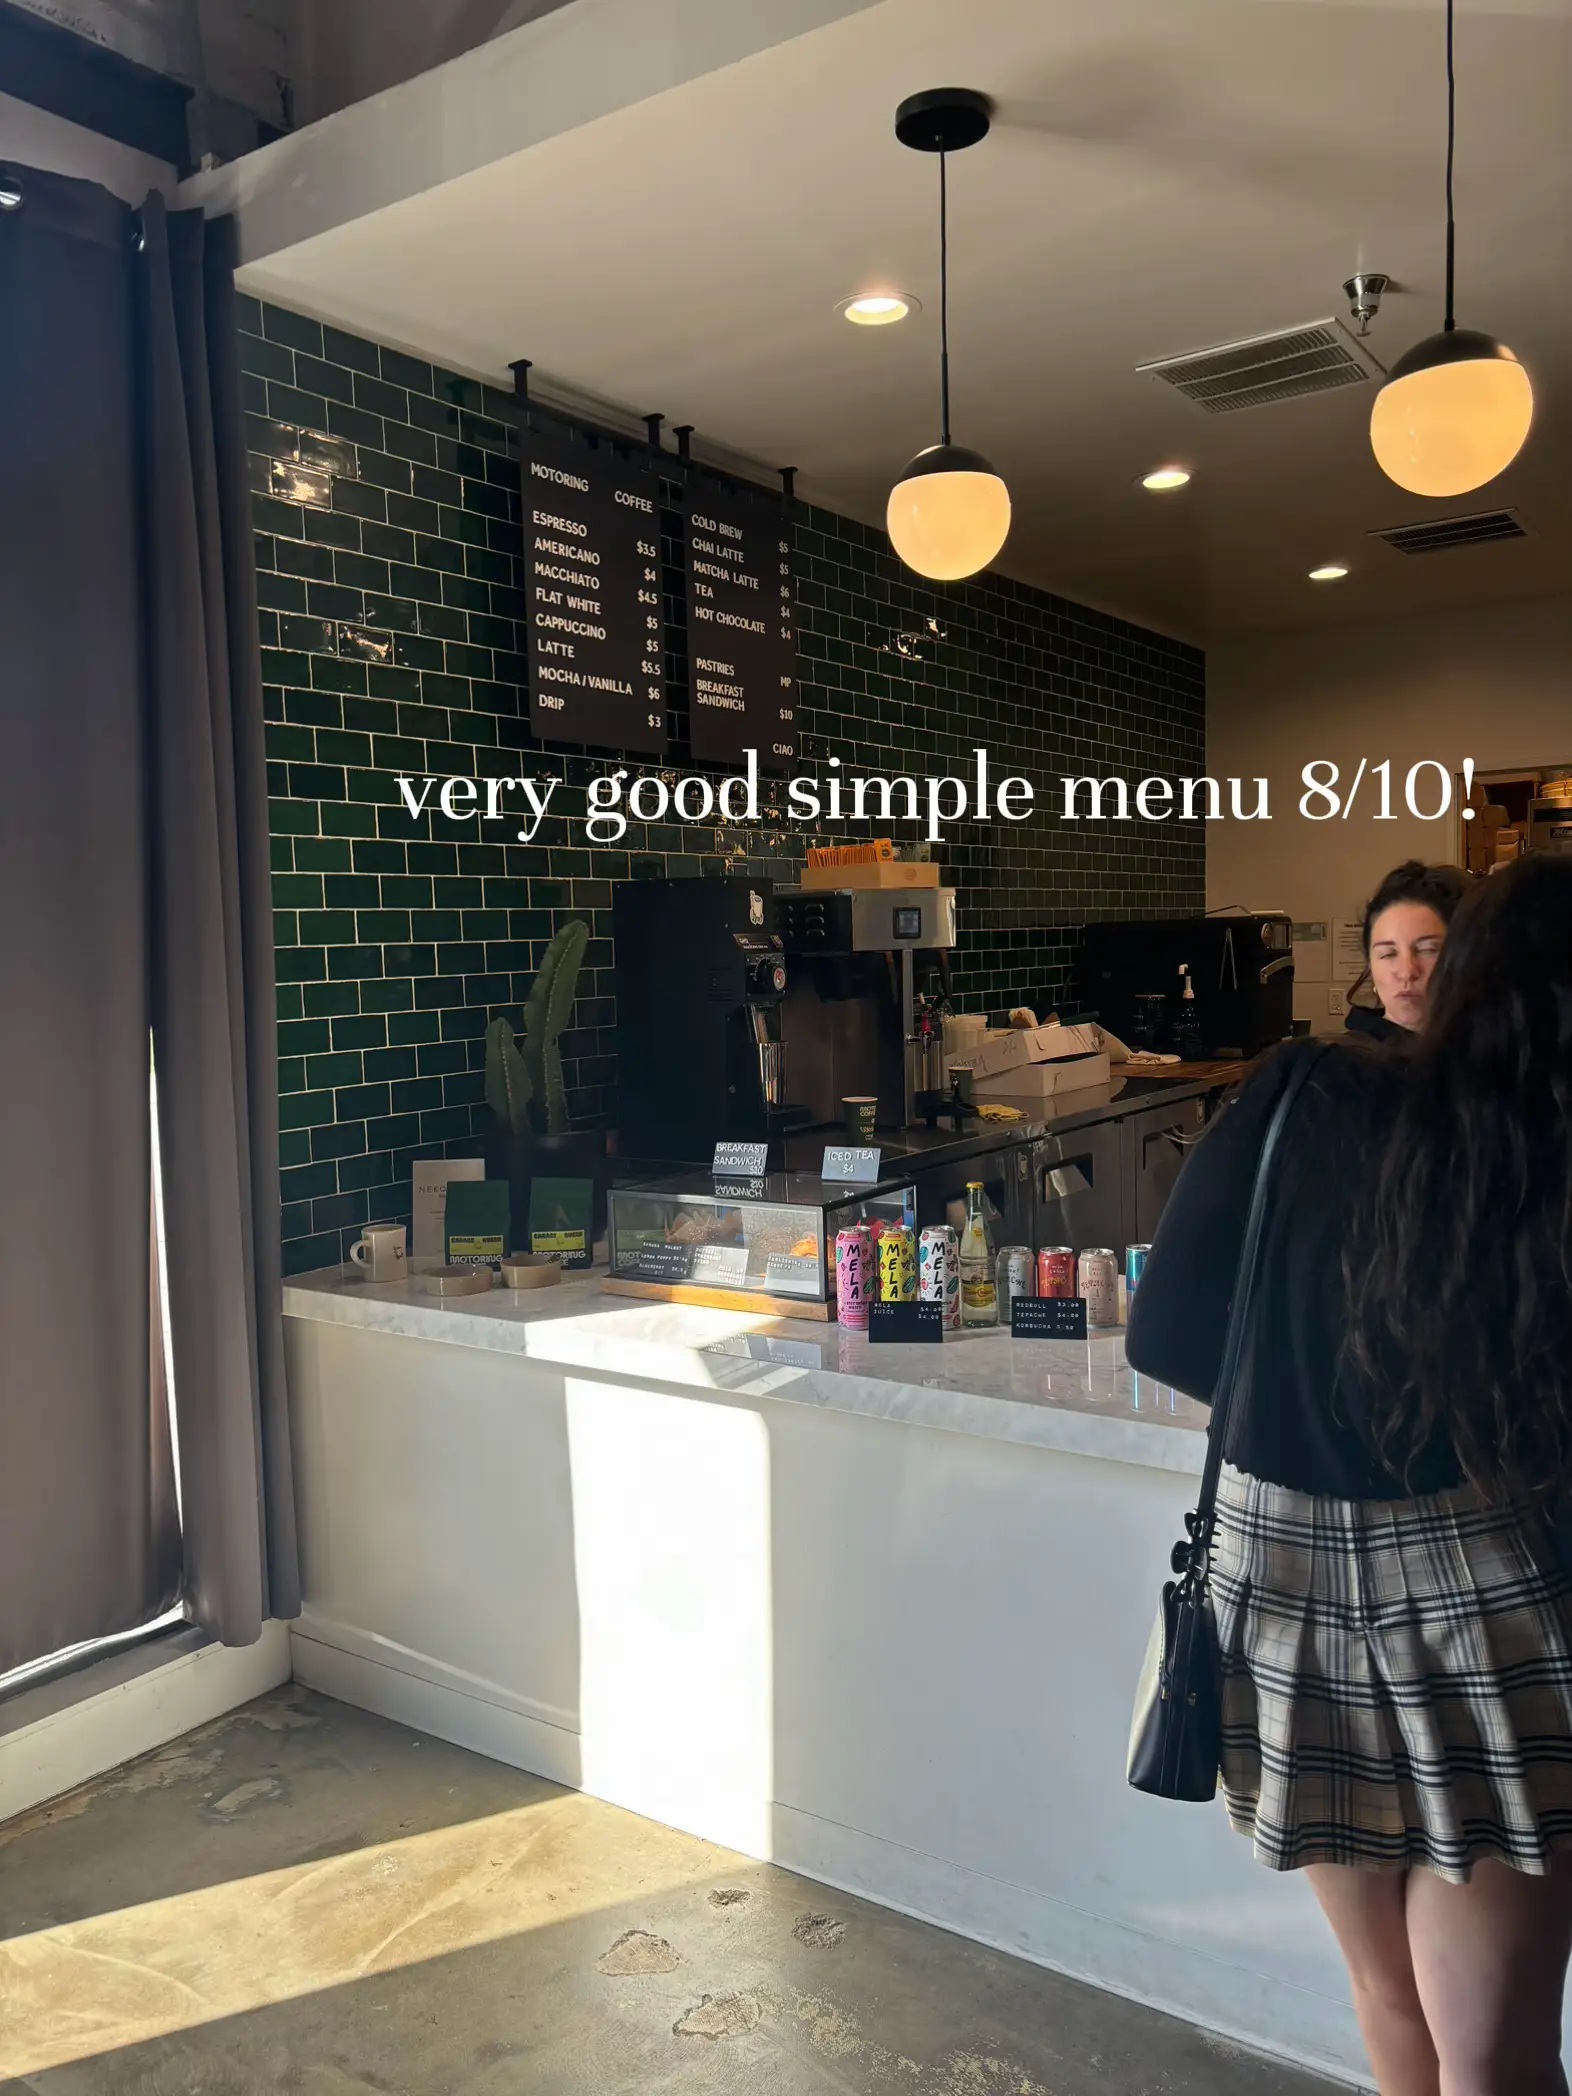  A woman is standing in front of a counter with a menu that says $10 very good simple menu.